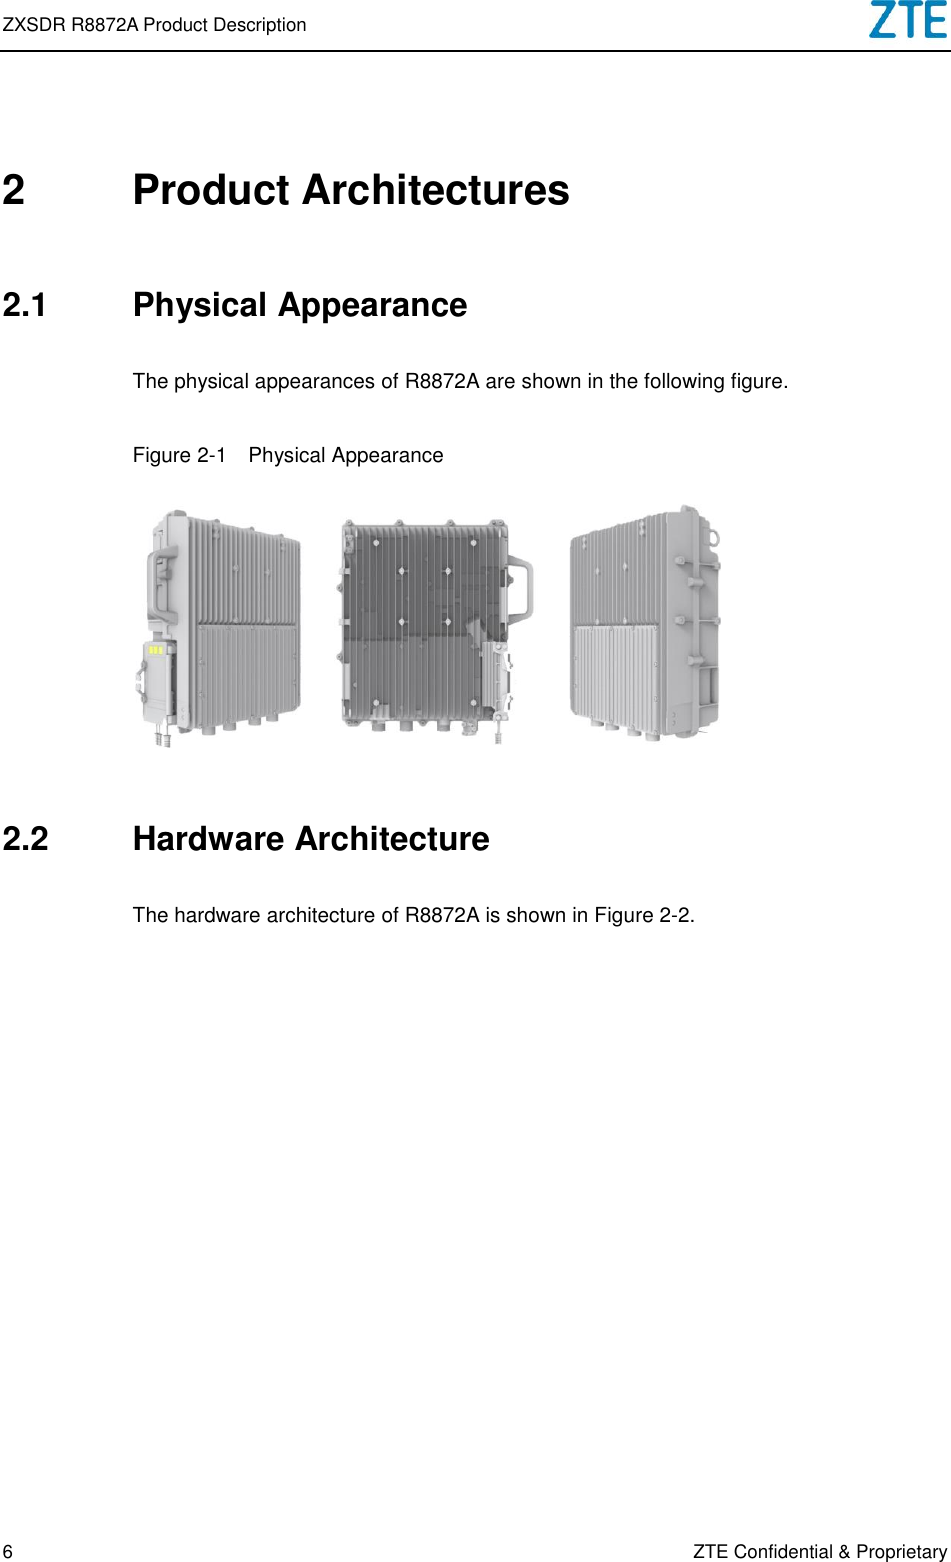 ZXSDR R8872A Product Description   6 ZTE Confidential &amp; Proprietary 2  Product Architectures 2.1  Physical Appearance The physical appearances of R8872A are shown in the following figure. Figure 2-1  Physical Appearance      2.2  Hardware Architecture The hardware architecture of R8872A is shown in Figure 2-2. 